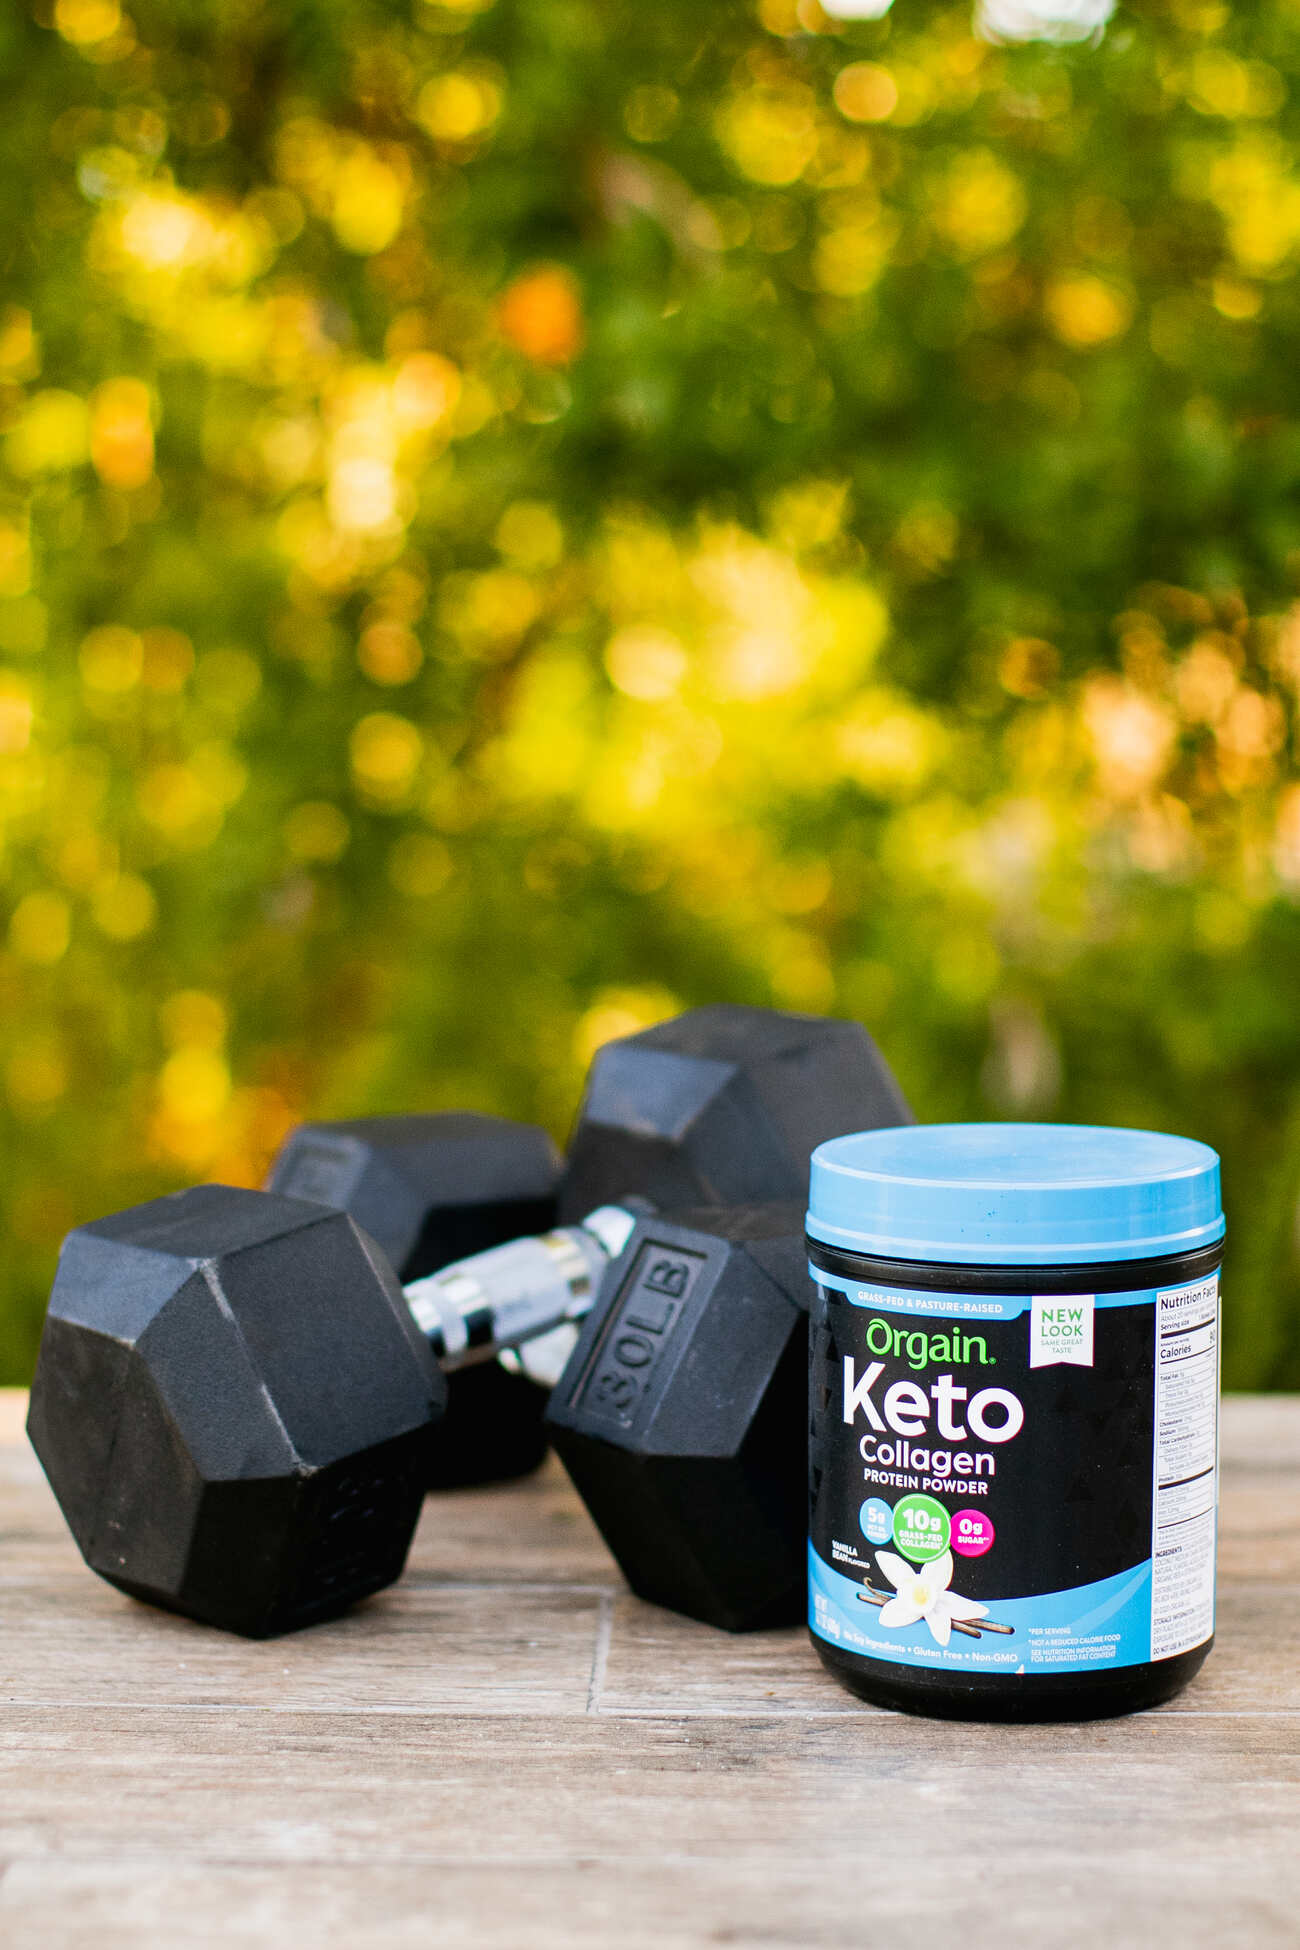 Orgain Keto Collagen container next to 30lb dumbbells on a wooden table outside